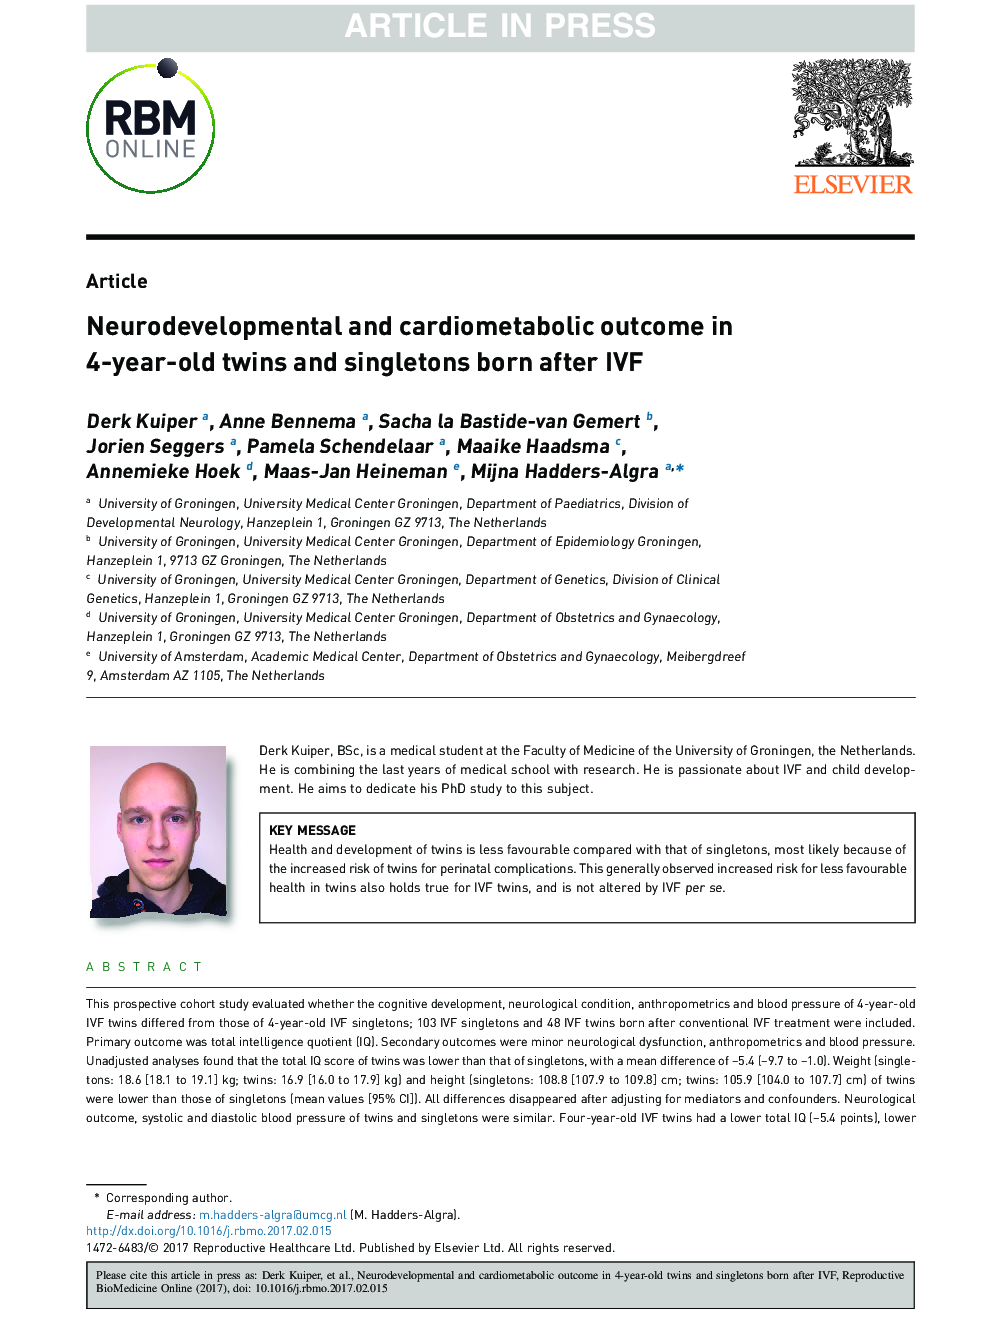 Neurodevelopmental and cardiometabolic outcome in 4-year-old twins and singletons born after IVF